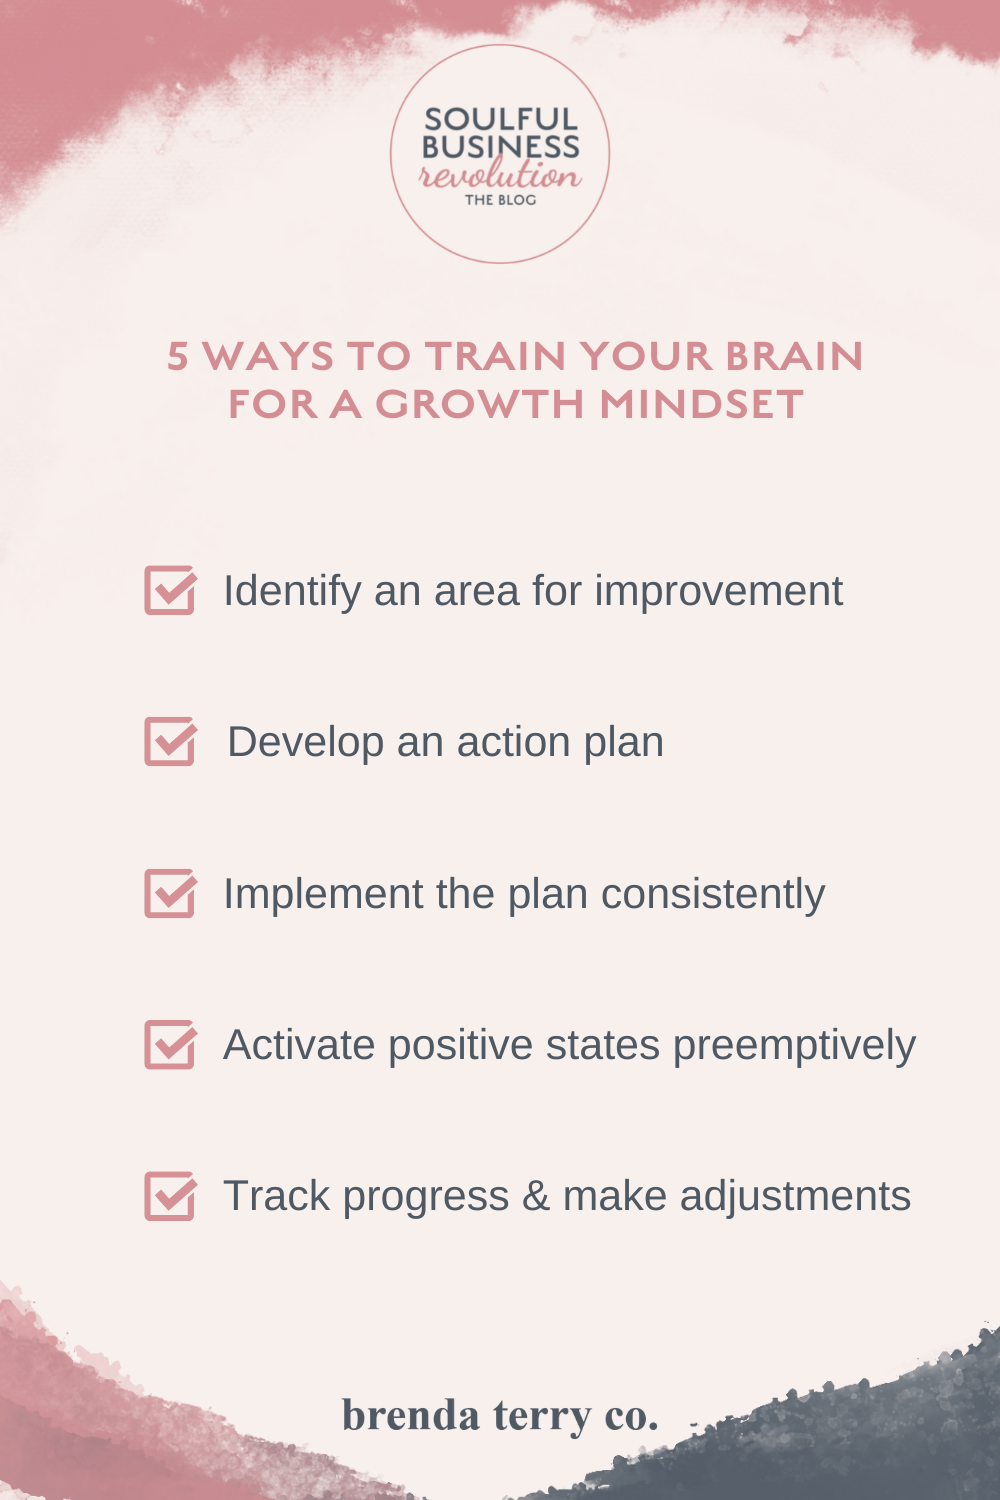 5 Ways to train your brain for a growth mindset in business